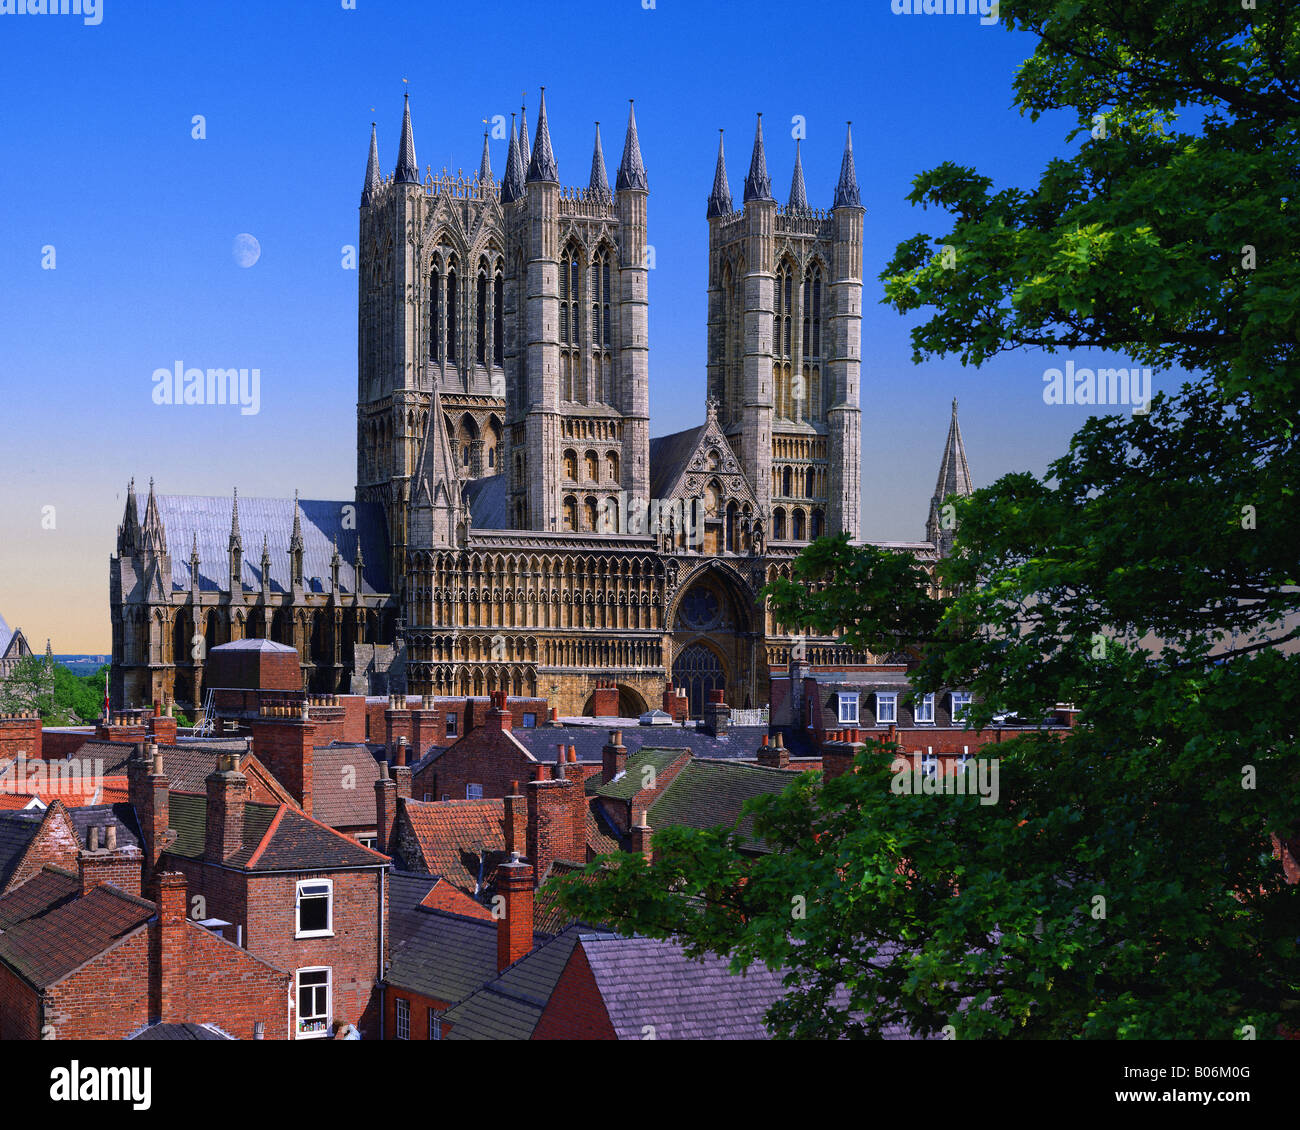 GB - LINCOLNSHIRE: Lincoln Kathedrale Stockfoto